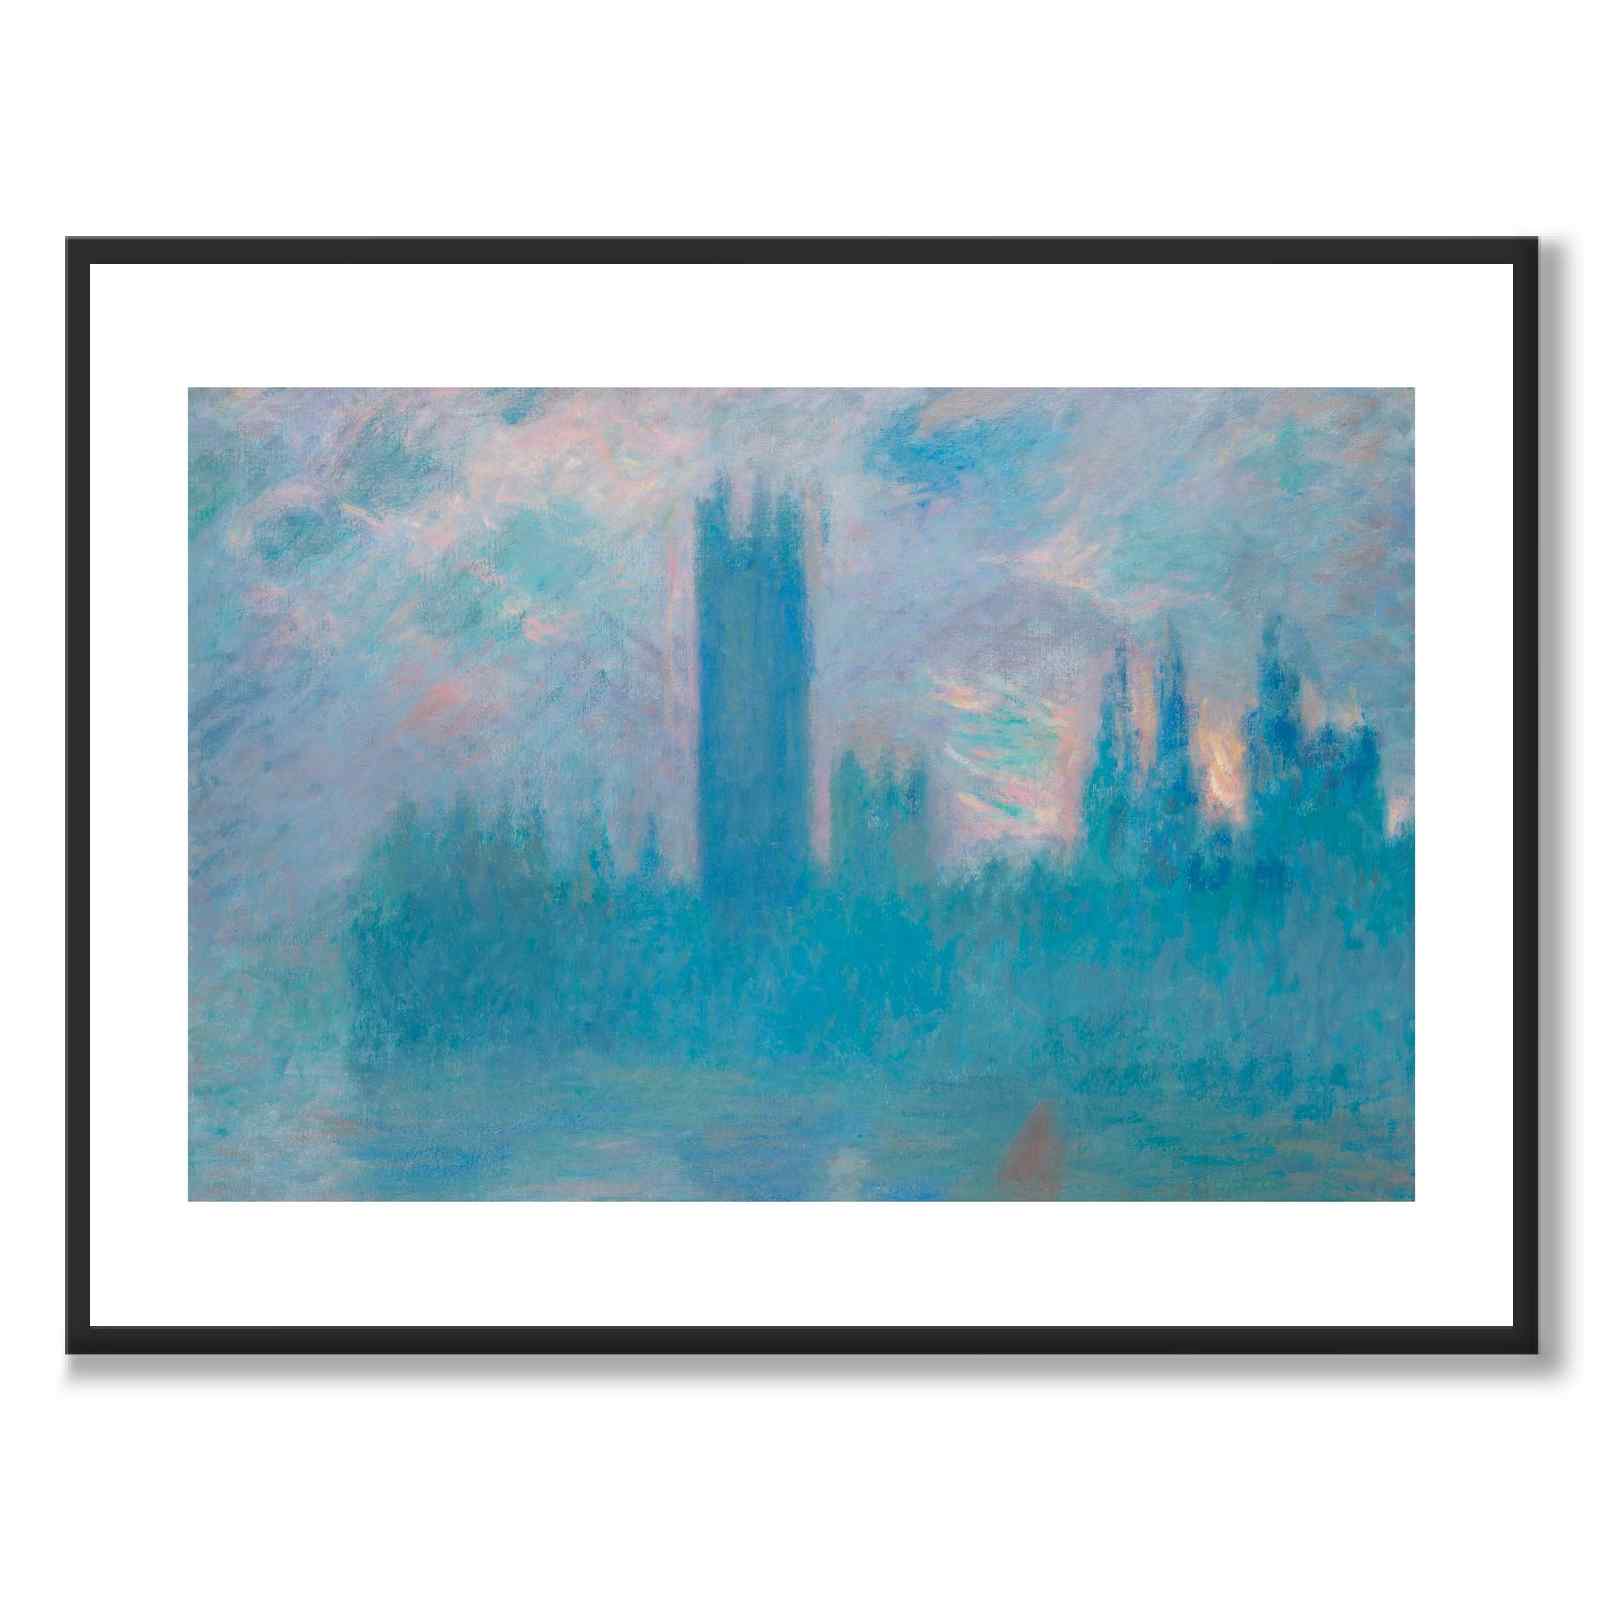 Houses of Parliament, London - Poster